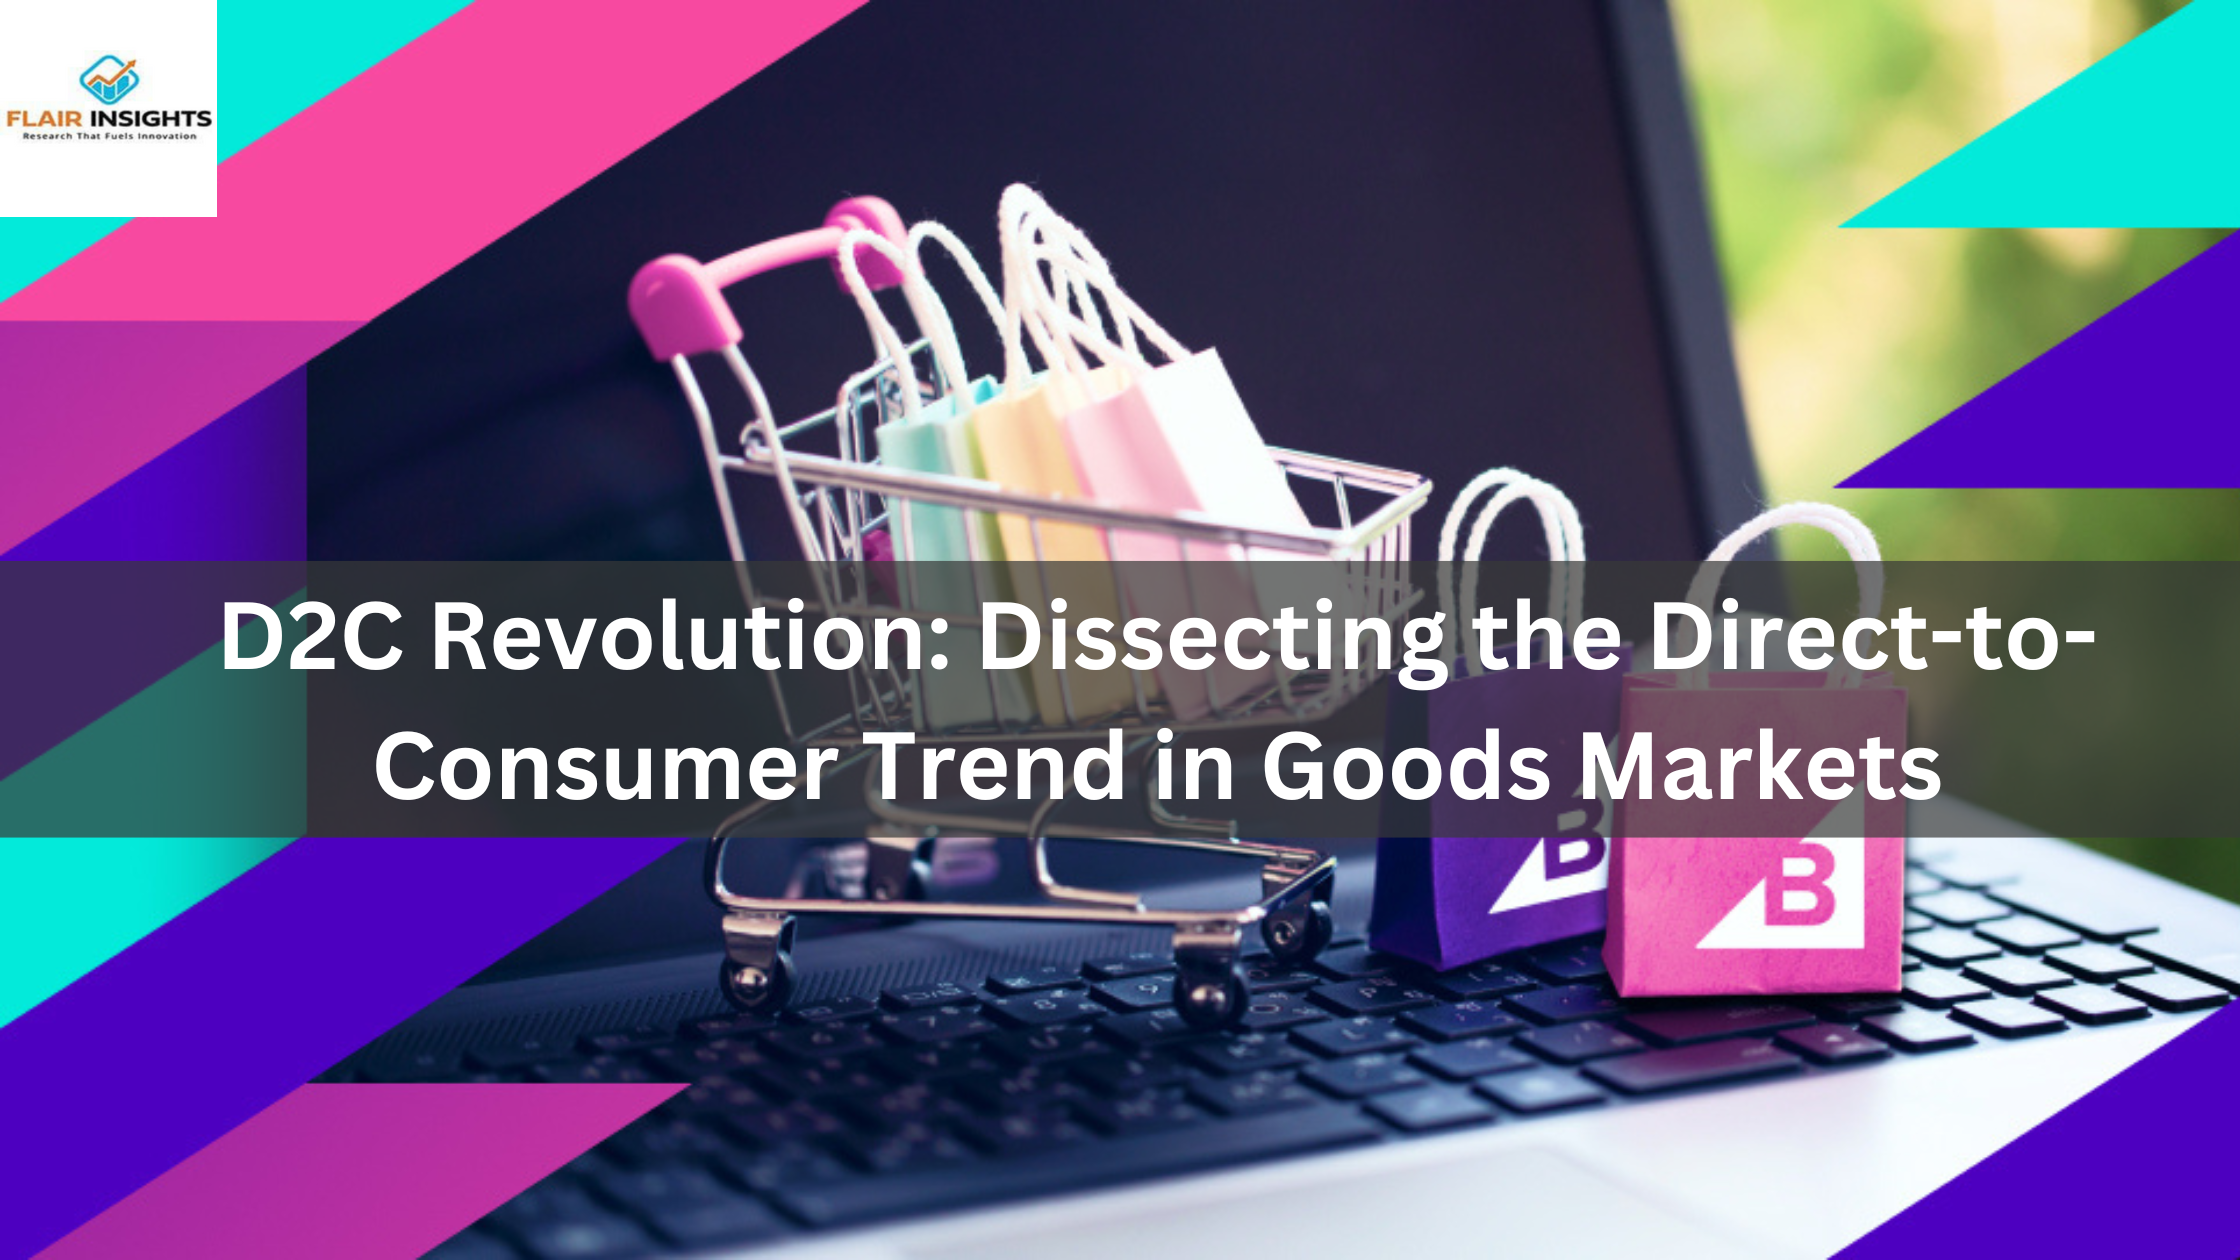 D2C Revolution: Dissecting the Direct-to-Consumer Trend in Goods Markets